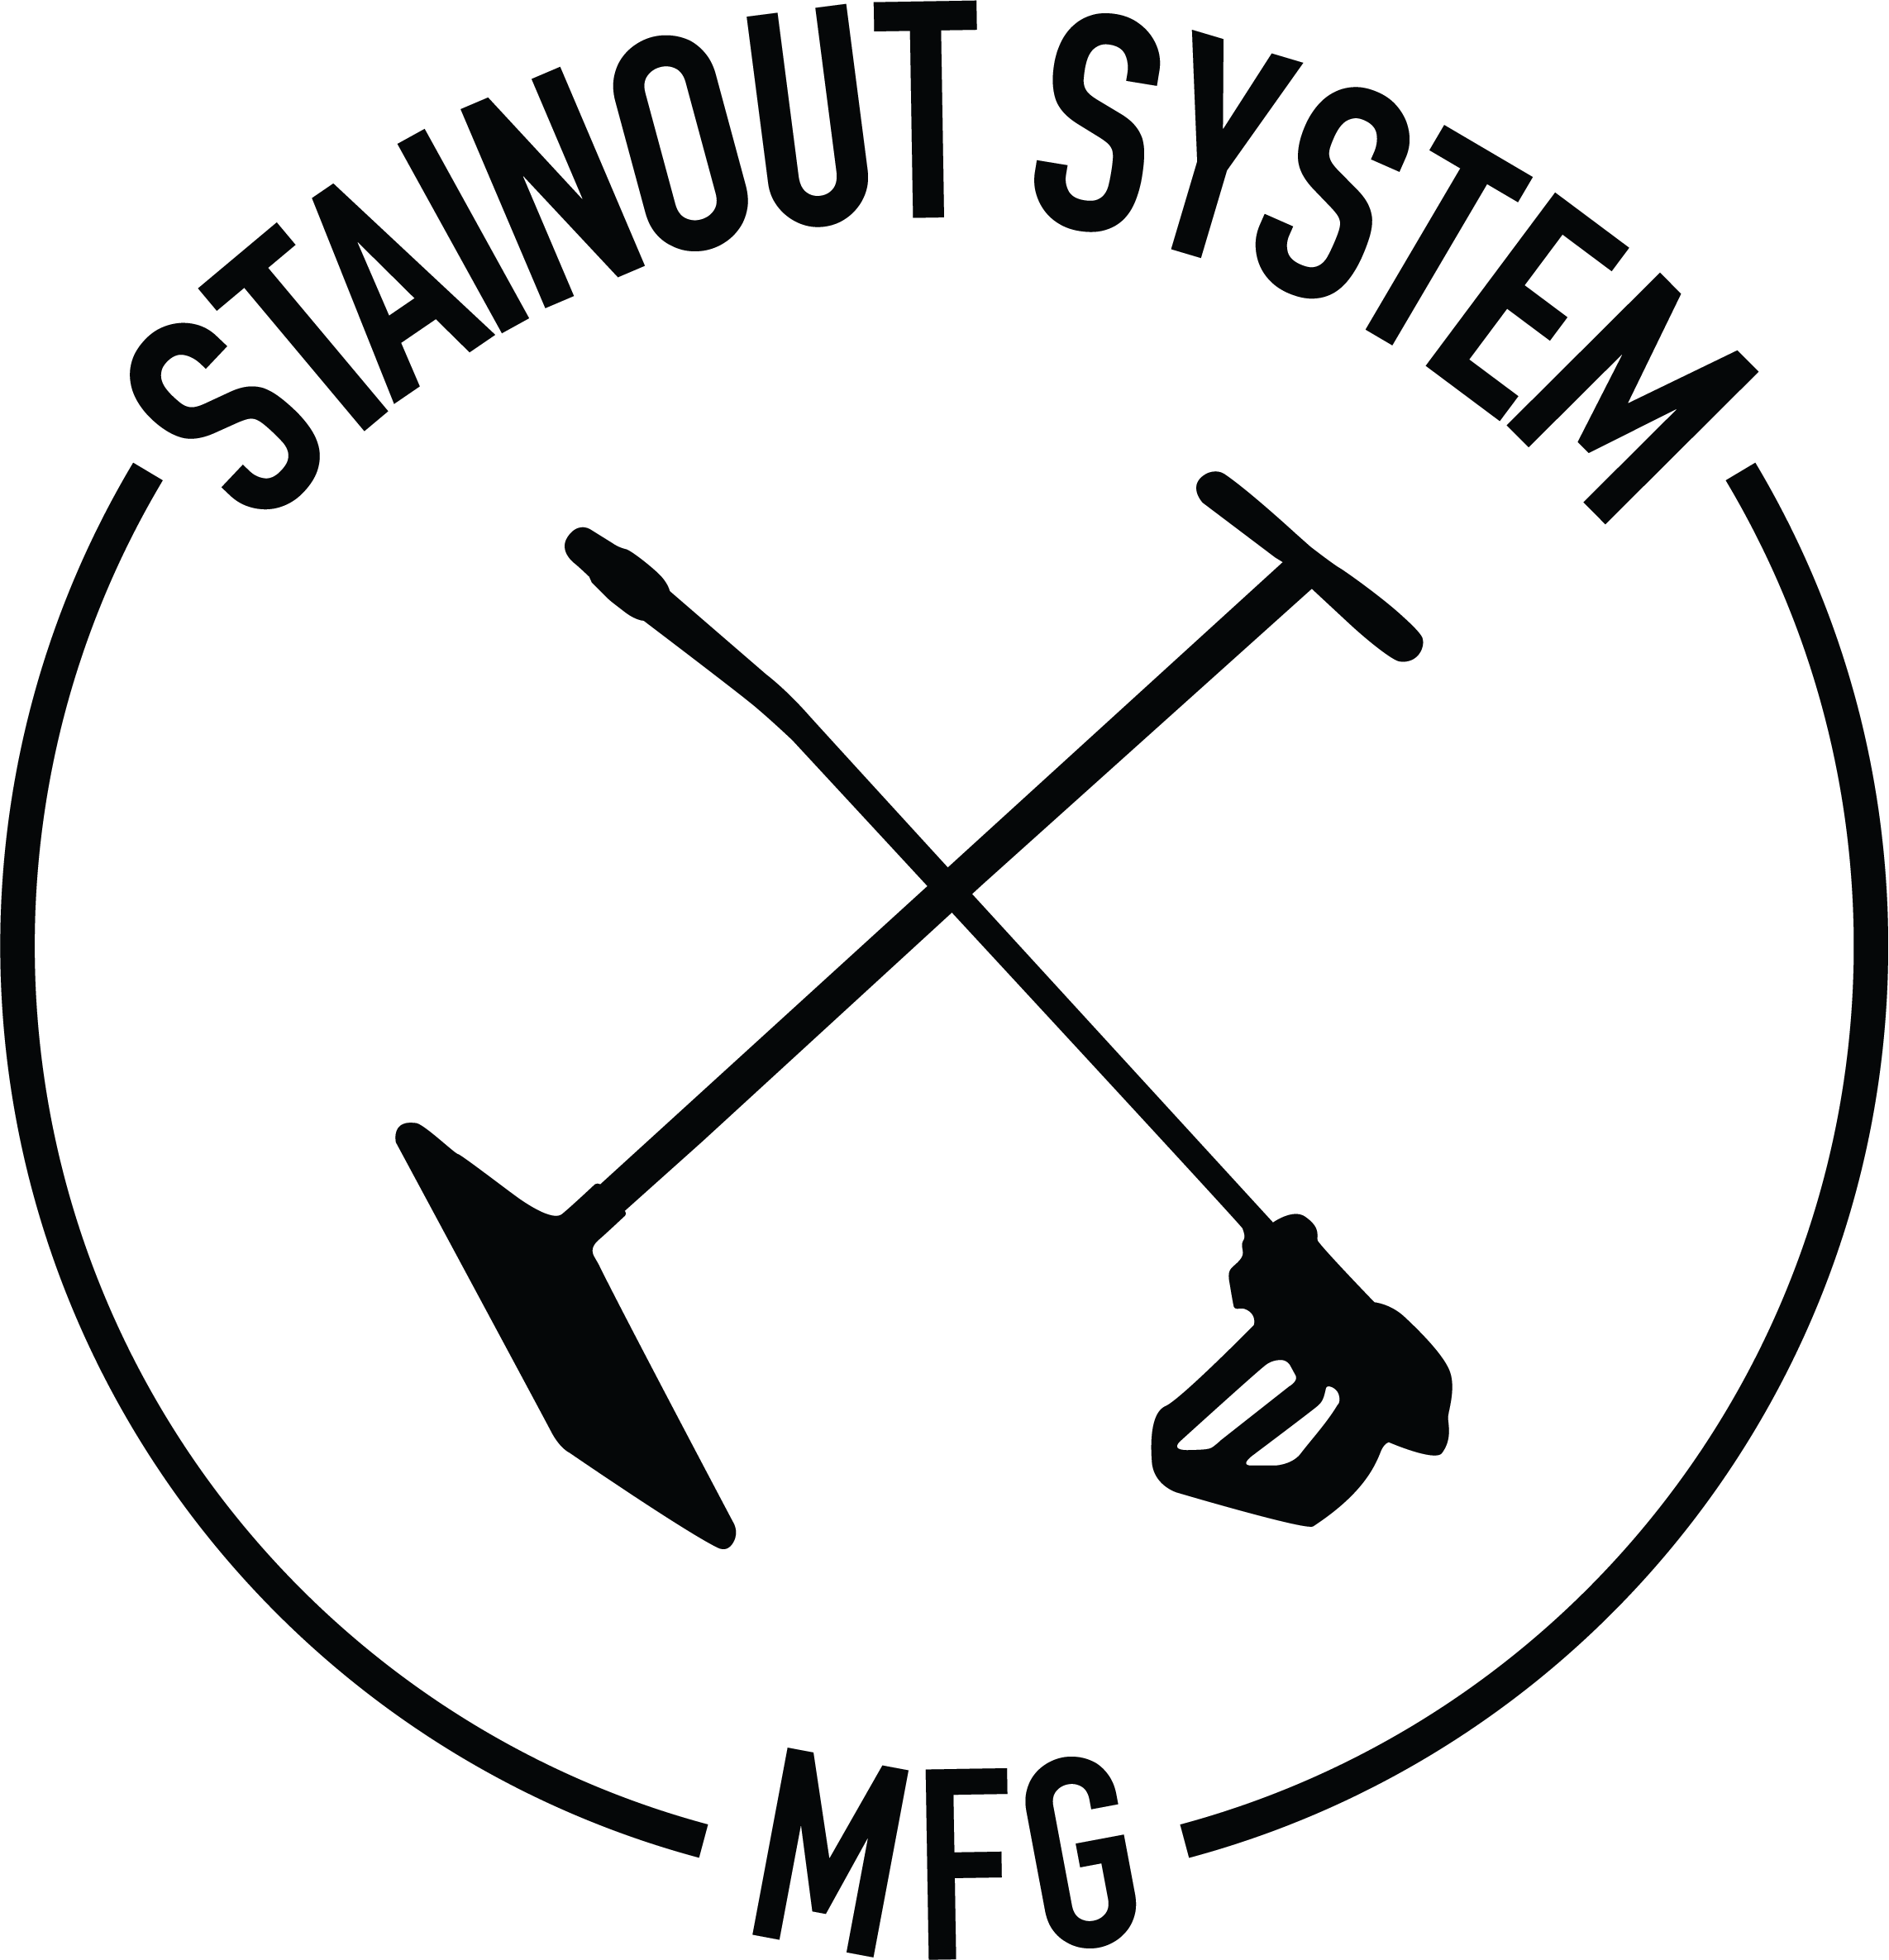 StainOut System